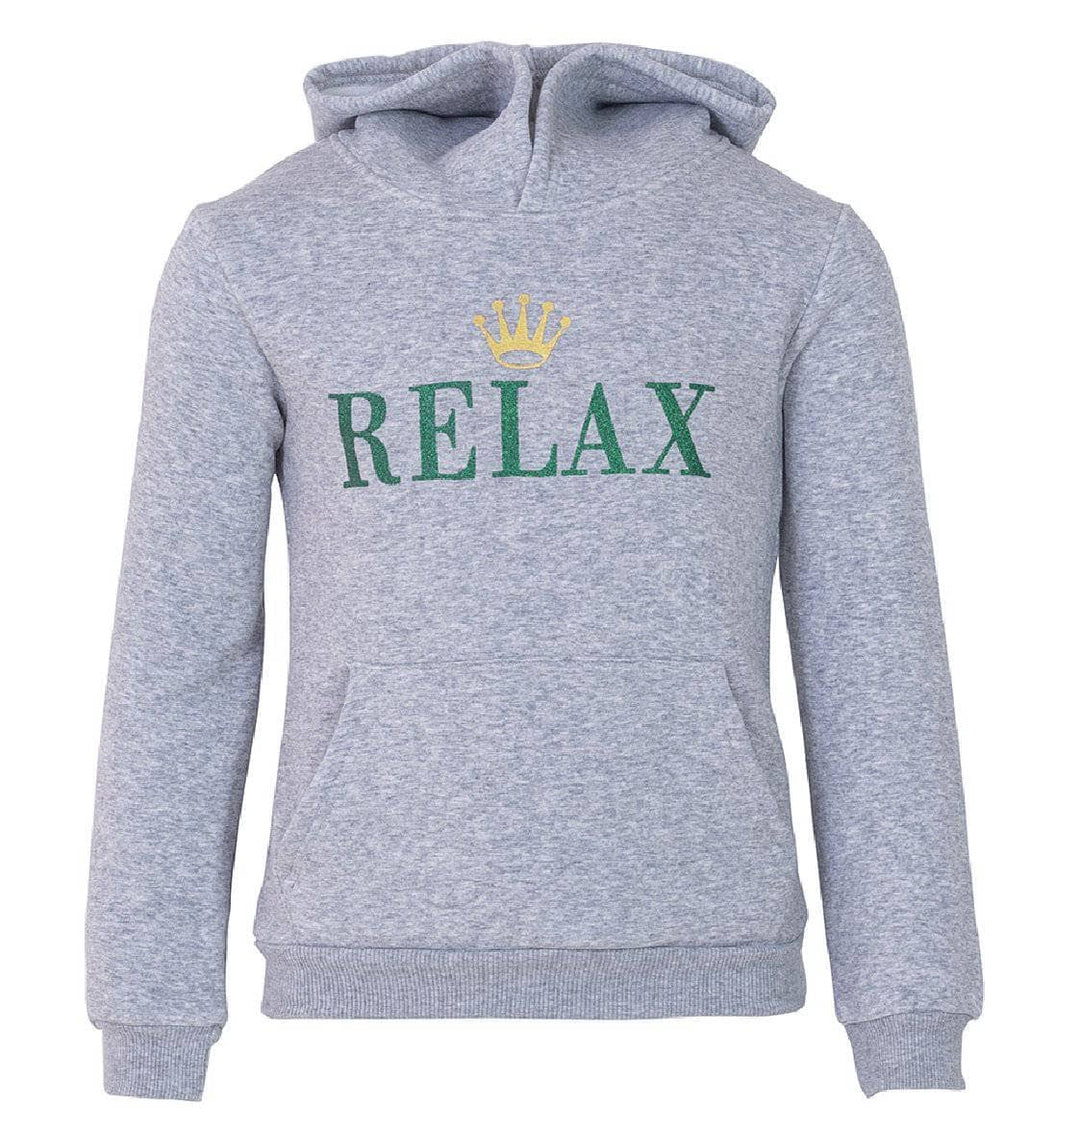 Girls Relax Hoodie by Lola and The Boys